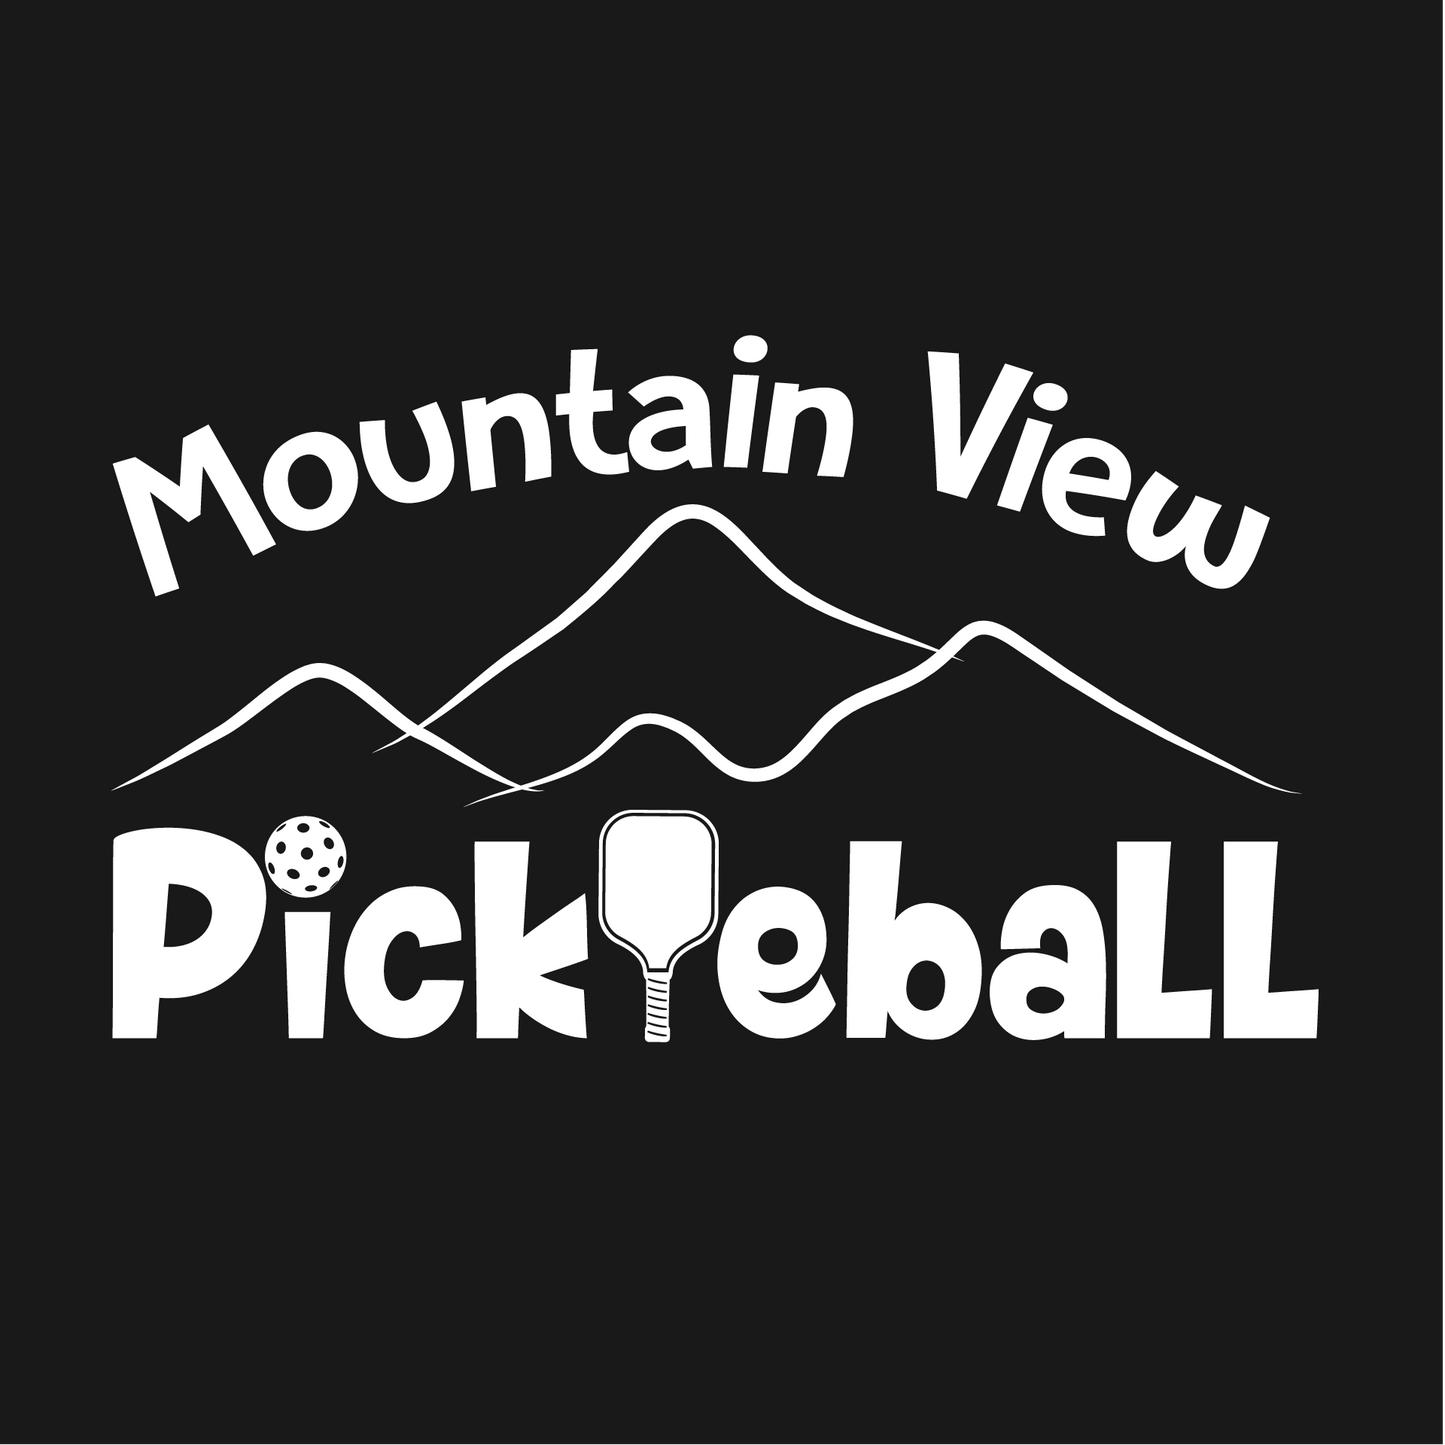 Mountain View Pickleball Club | Women's Long Sleeve Scoop Neck Pickleball Shirts | 75/13/12 poly/cotton/rayon